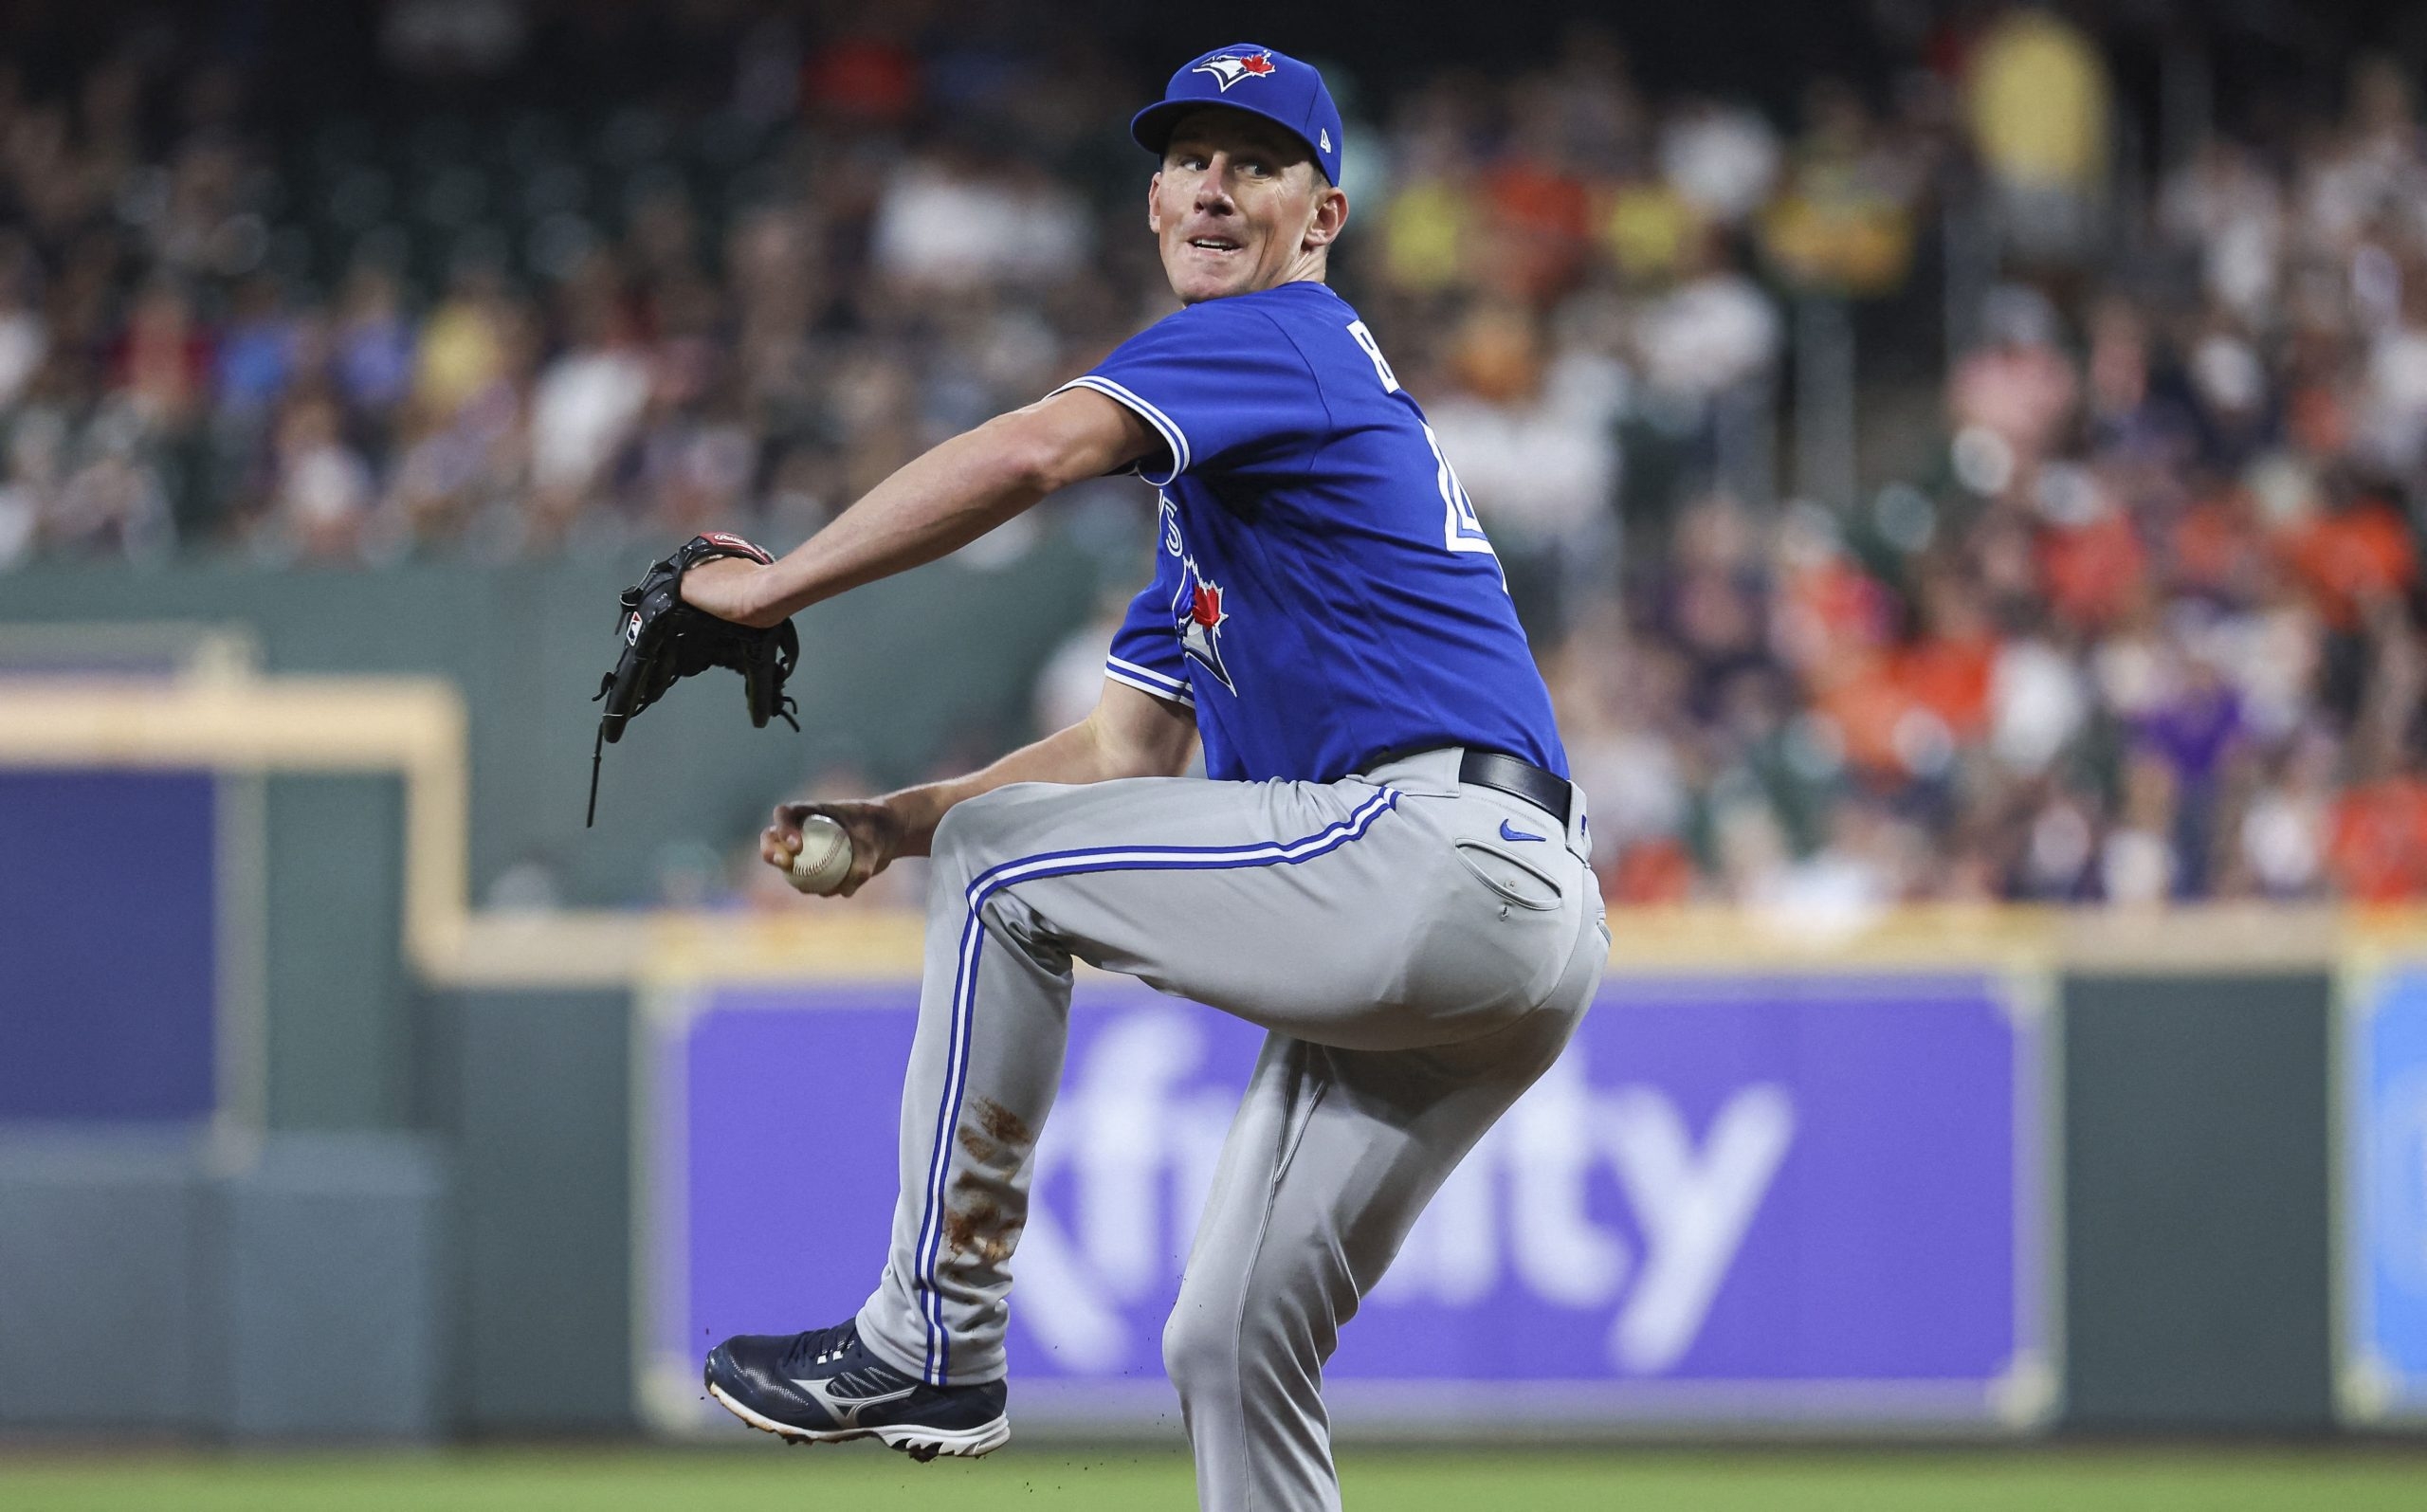 Blue Jays Wild Card Watch: Toronto has huge opportunity as Astros